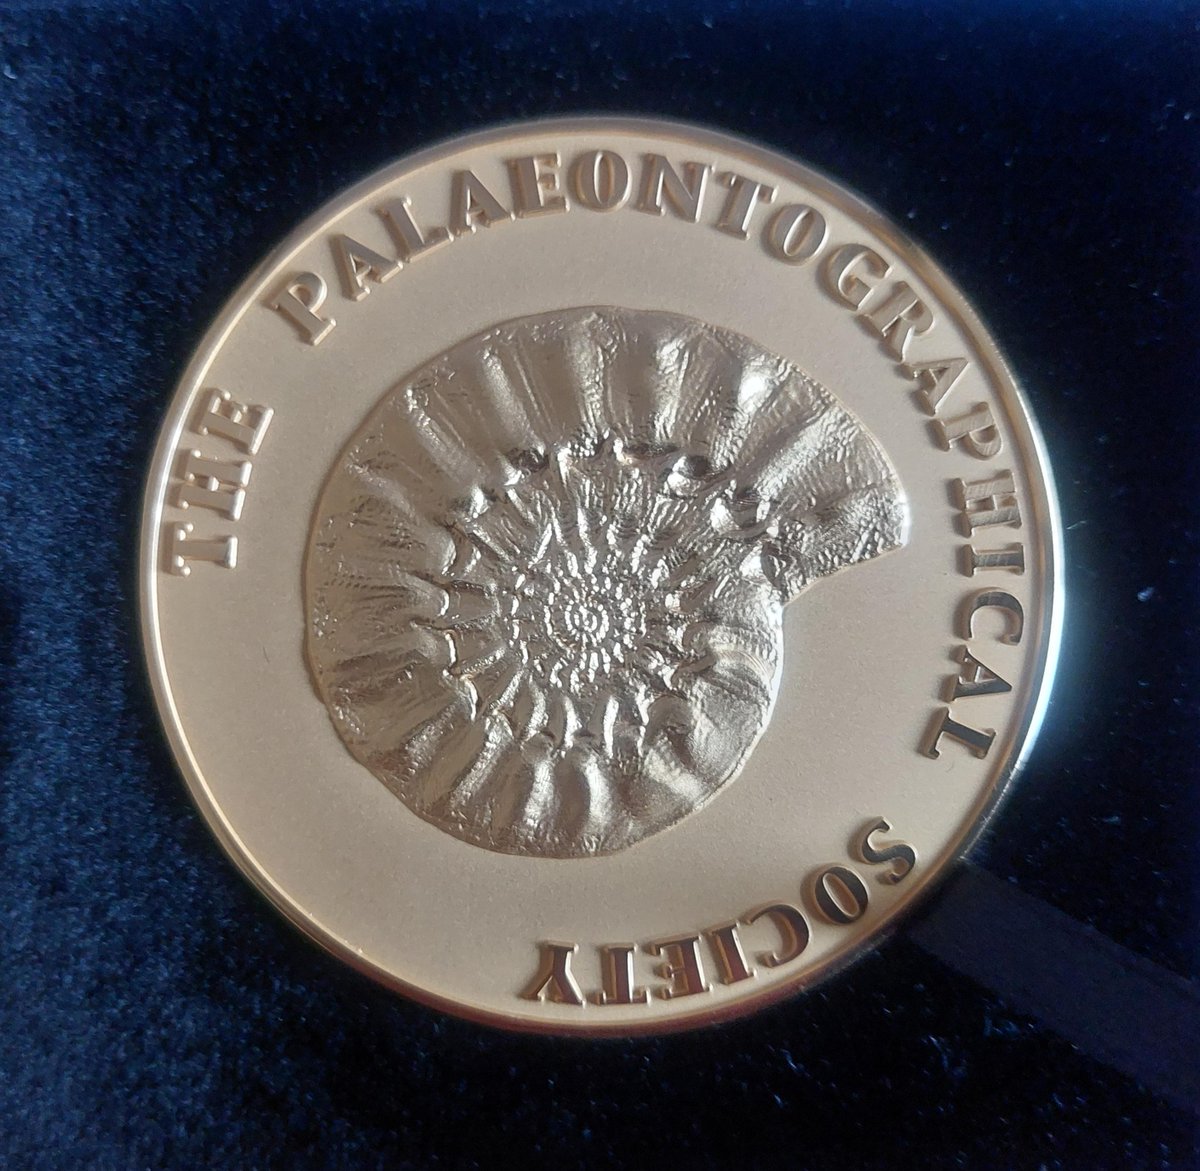 Very grateful to the @Palaeonto_Soc for awarding me their biennial medal in recognition of my contributions to taxonomic and systematic palaeontology. My thanks go to all those who put me forward for this honour.